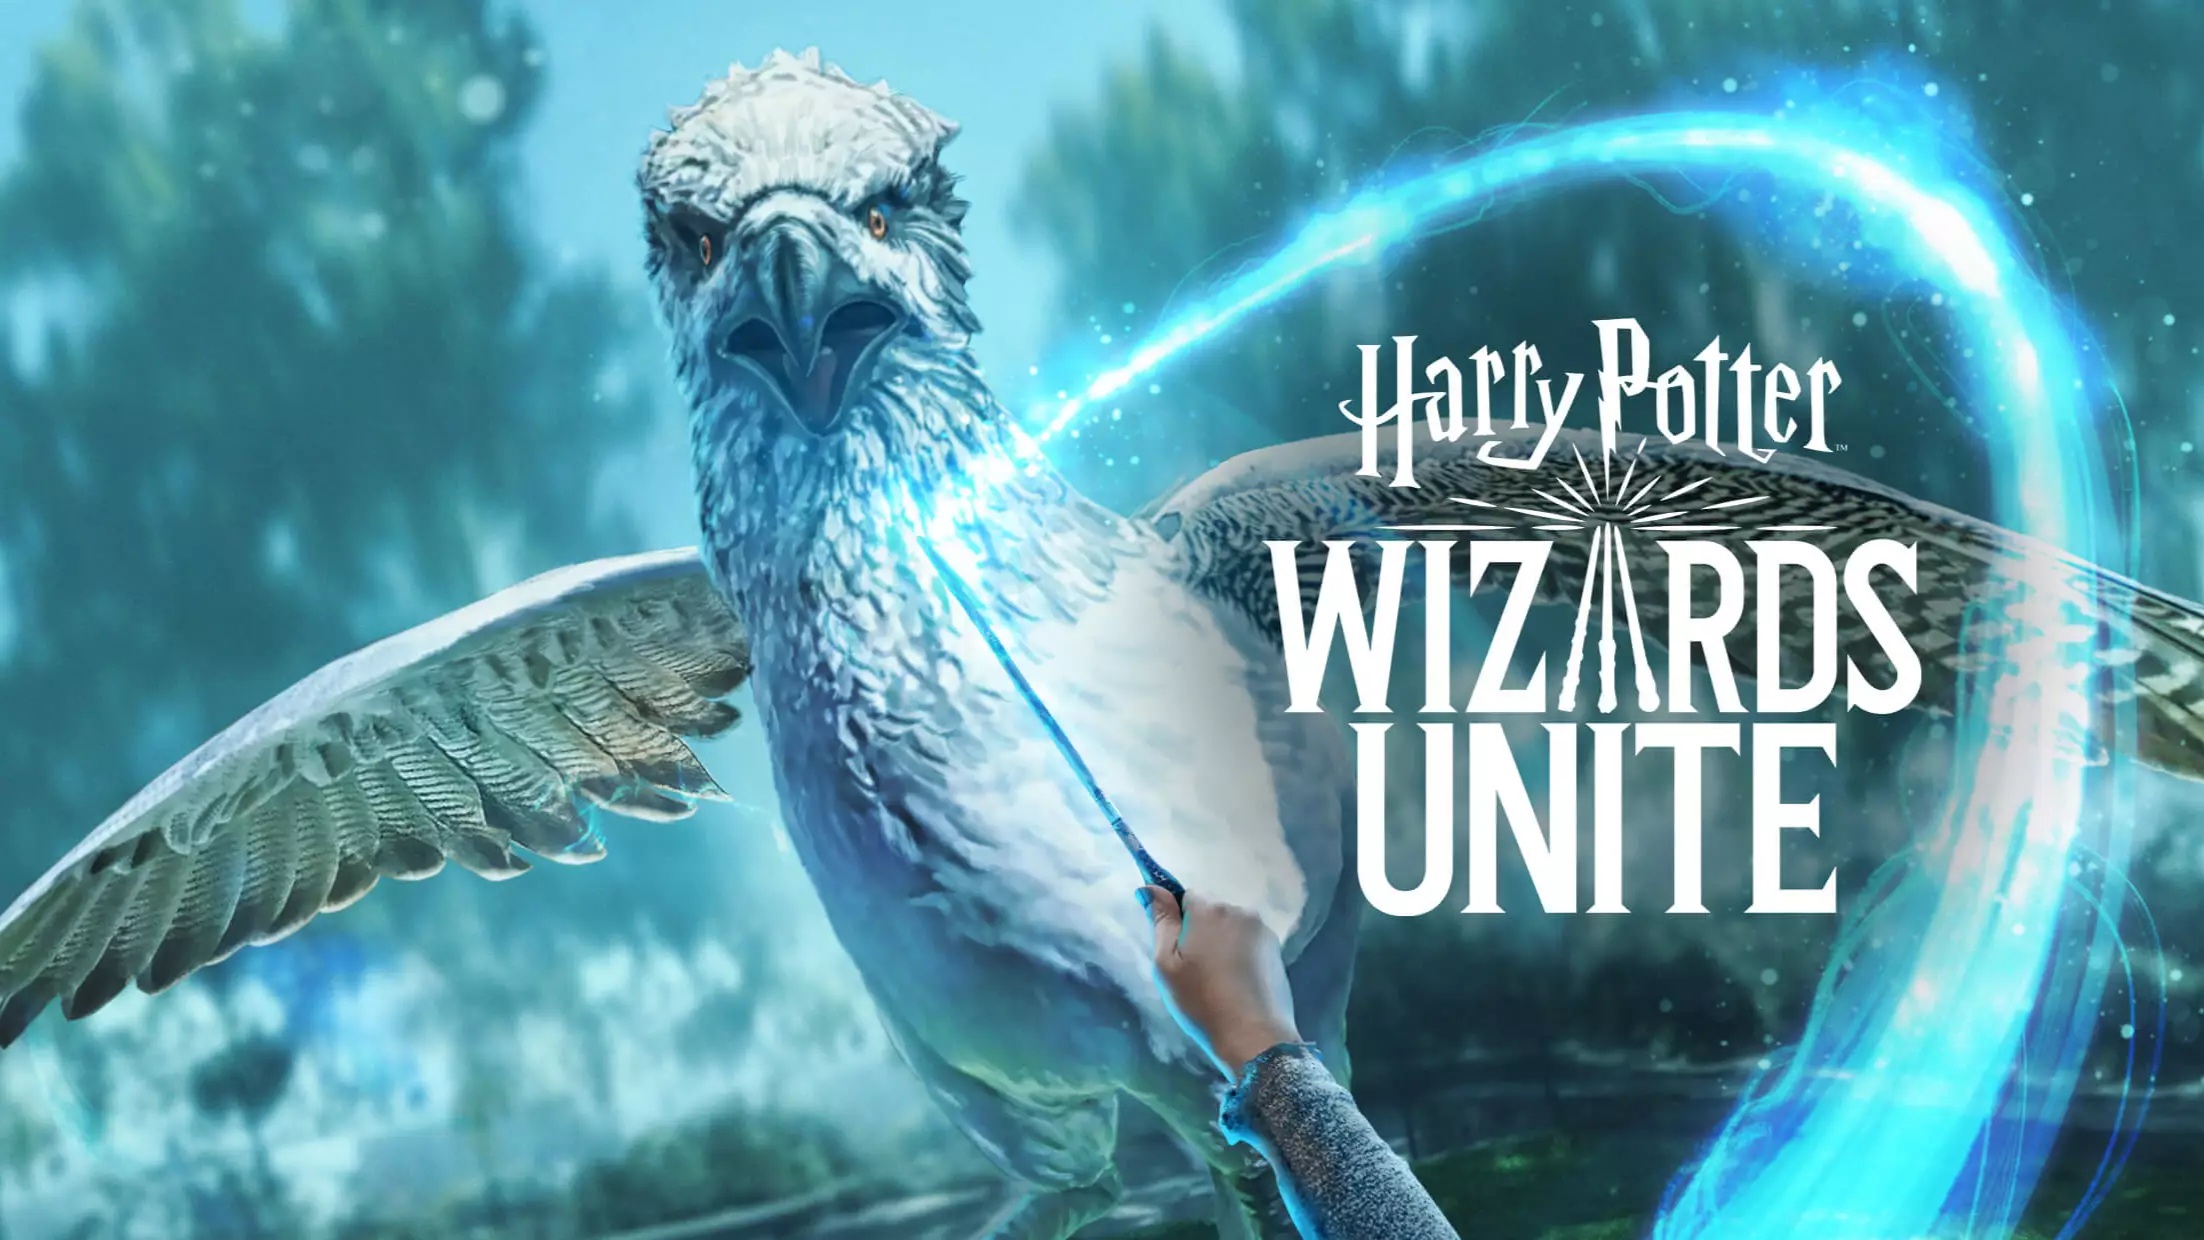 An AR 'Harry Potter' Game Is Coming And We Bet It'll Be Just As Big As 'Pokémon Go'